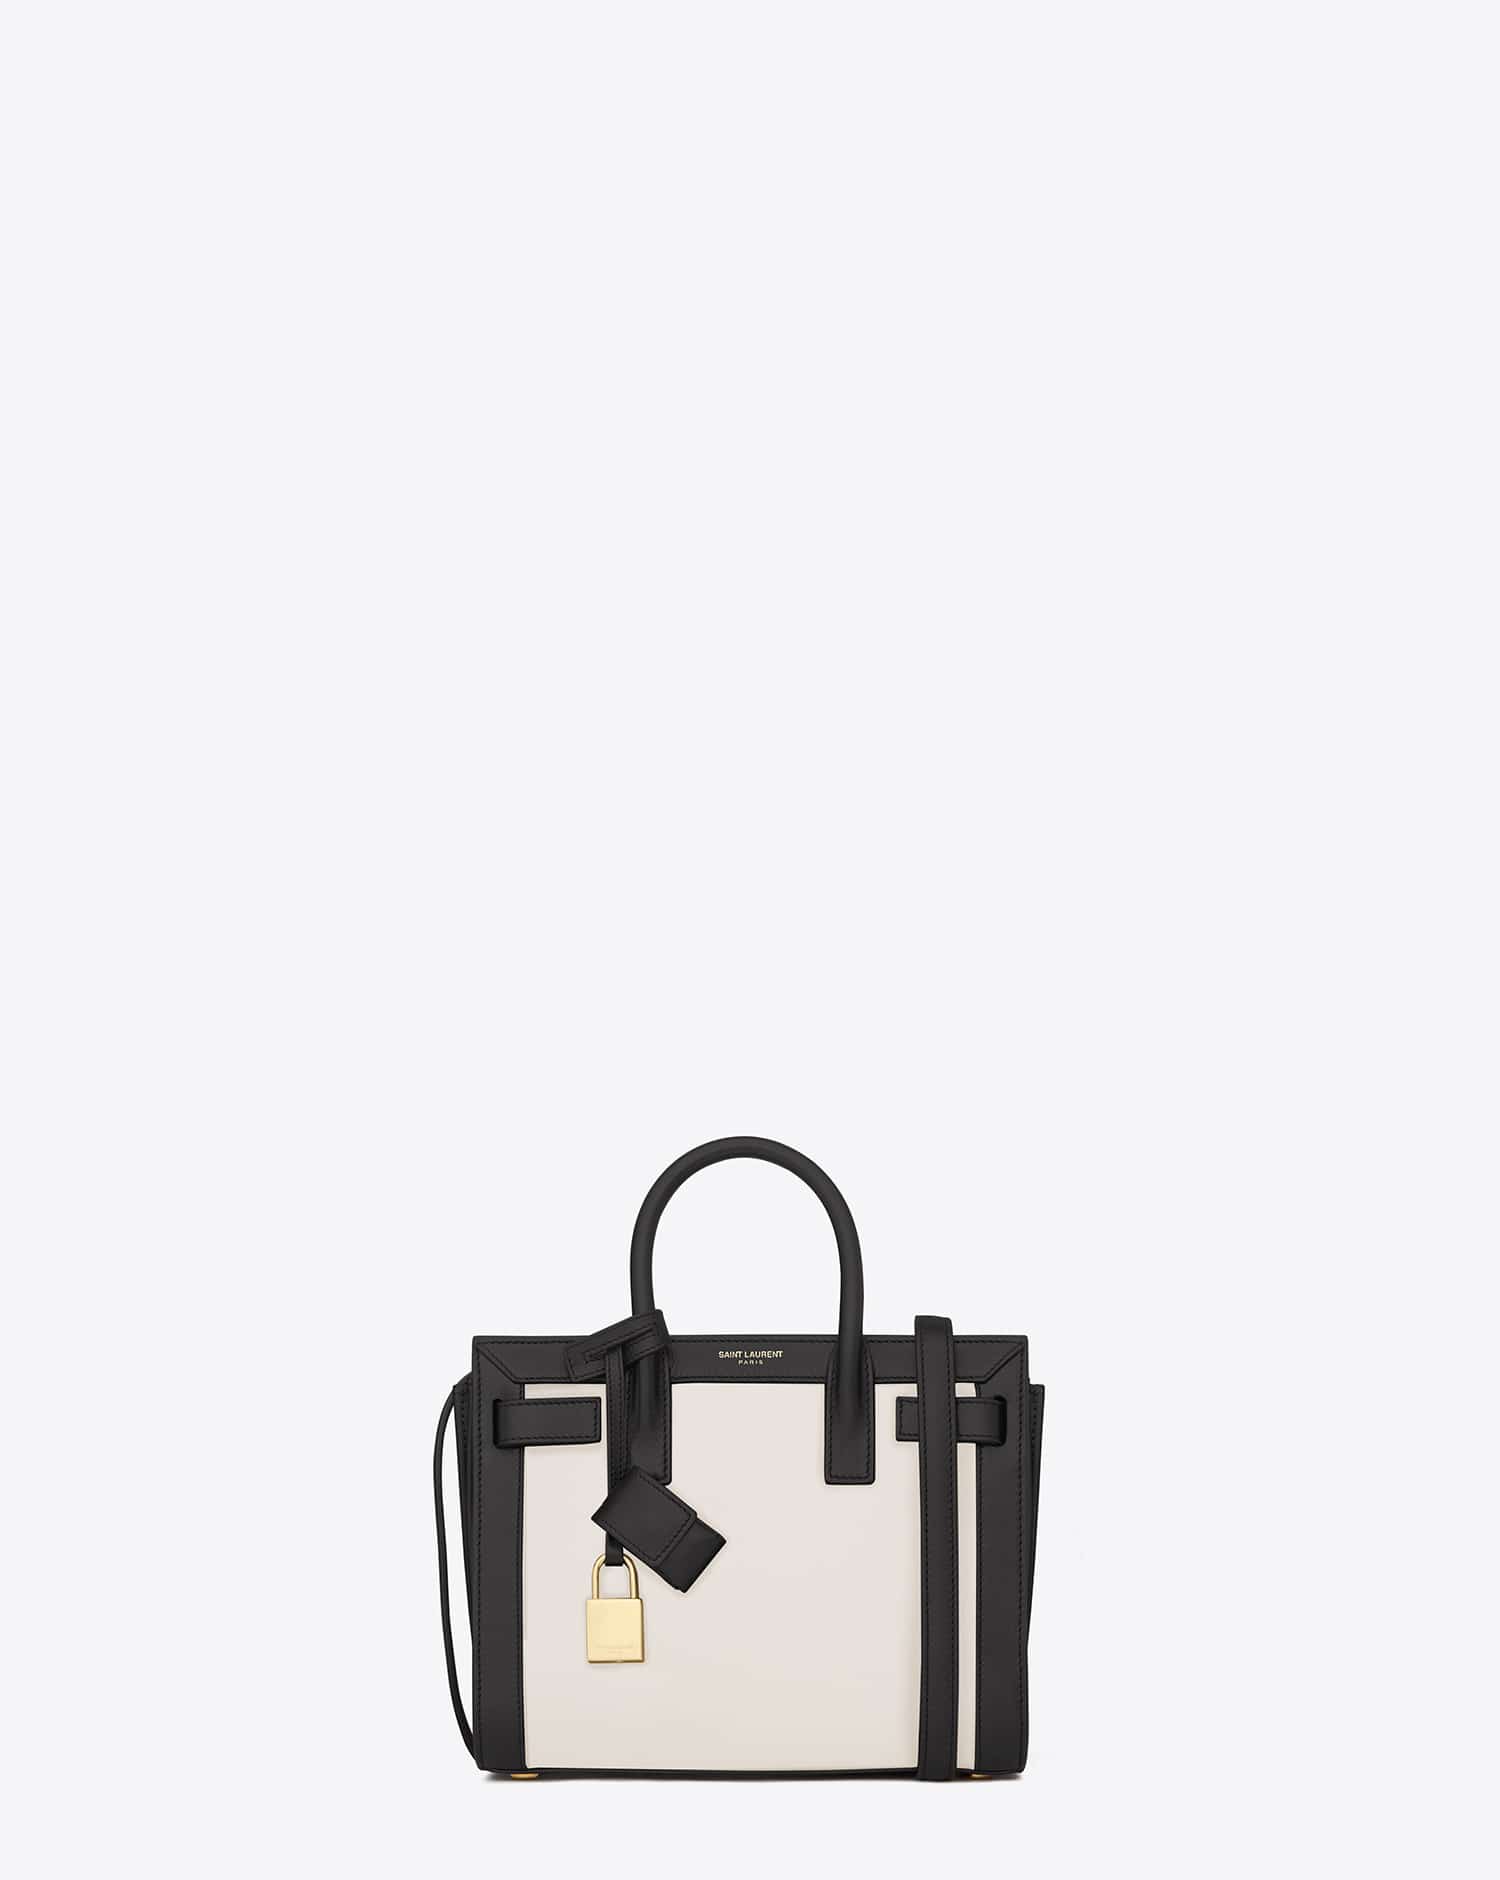 Saint Laurent Cruise 2015 Bag Collection | Spotted Fashion  